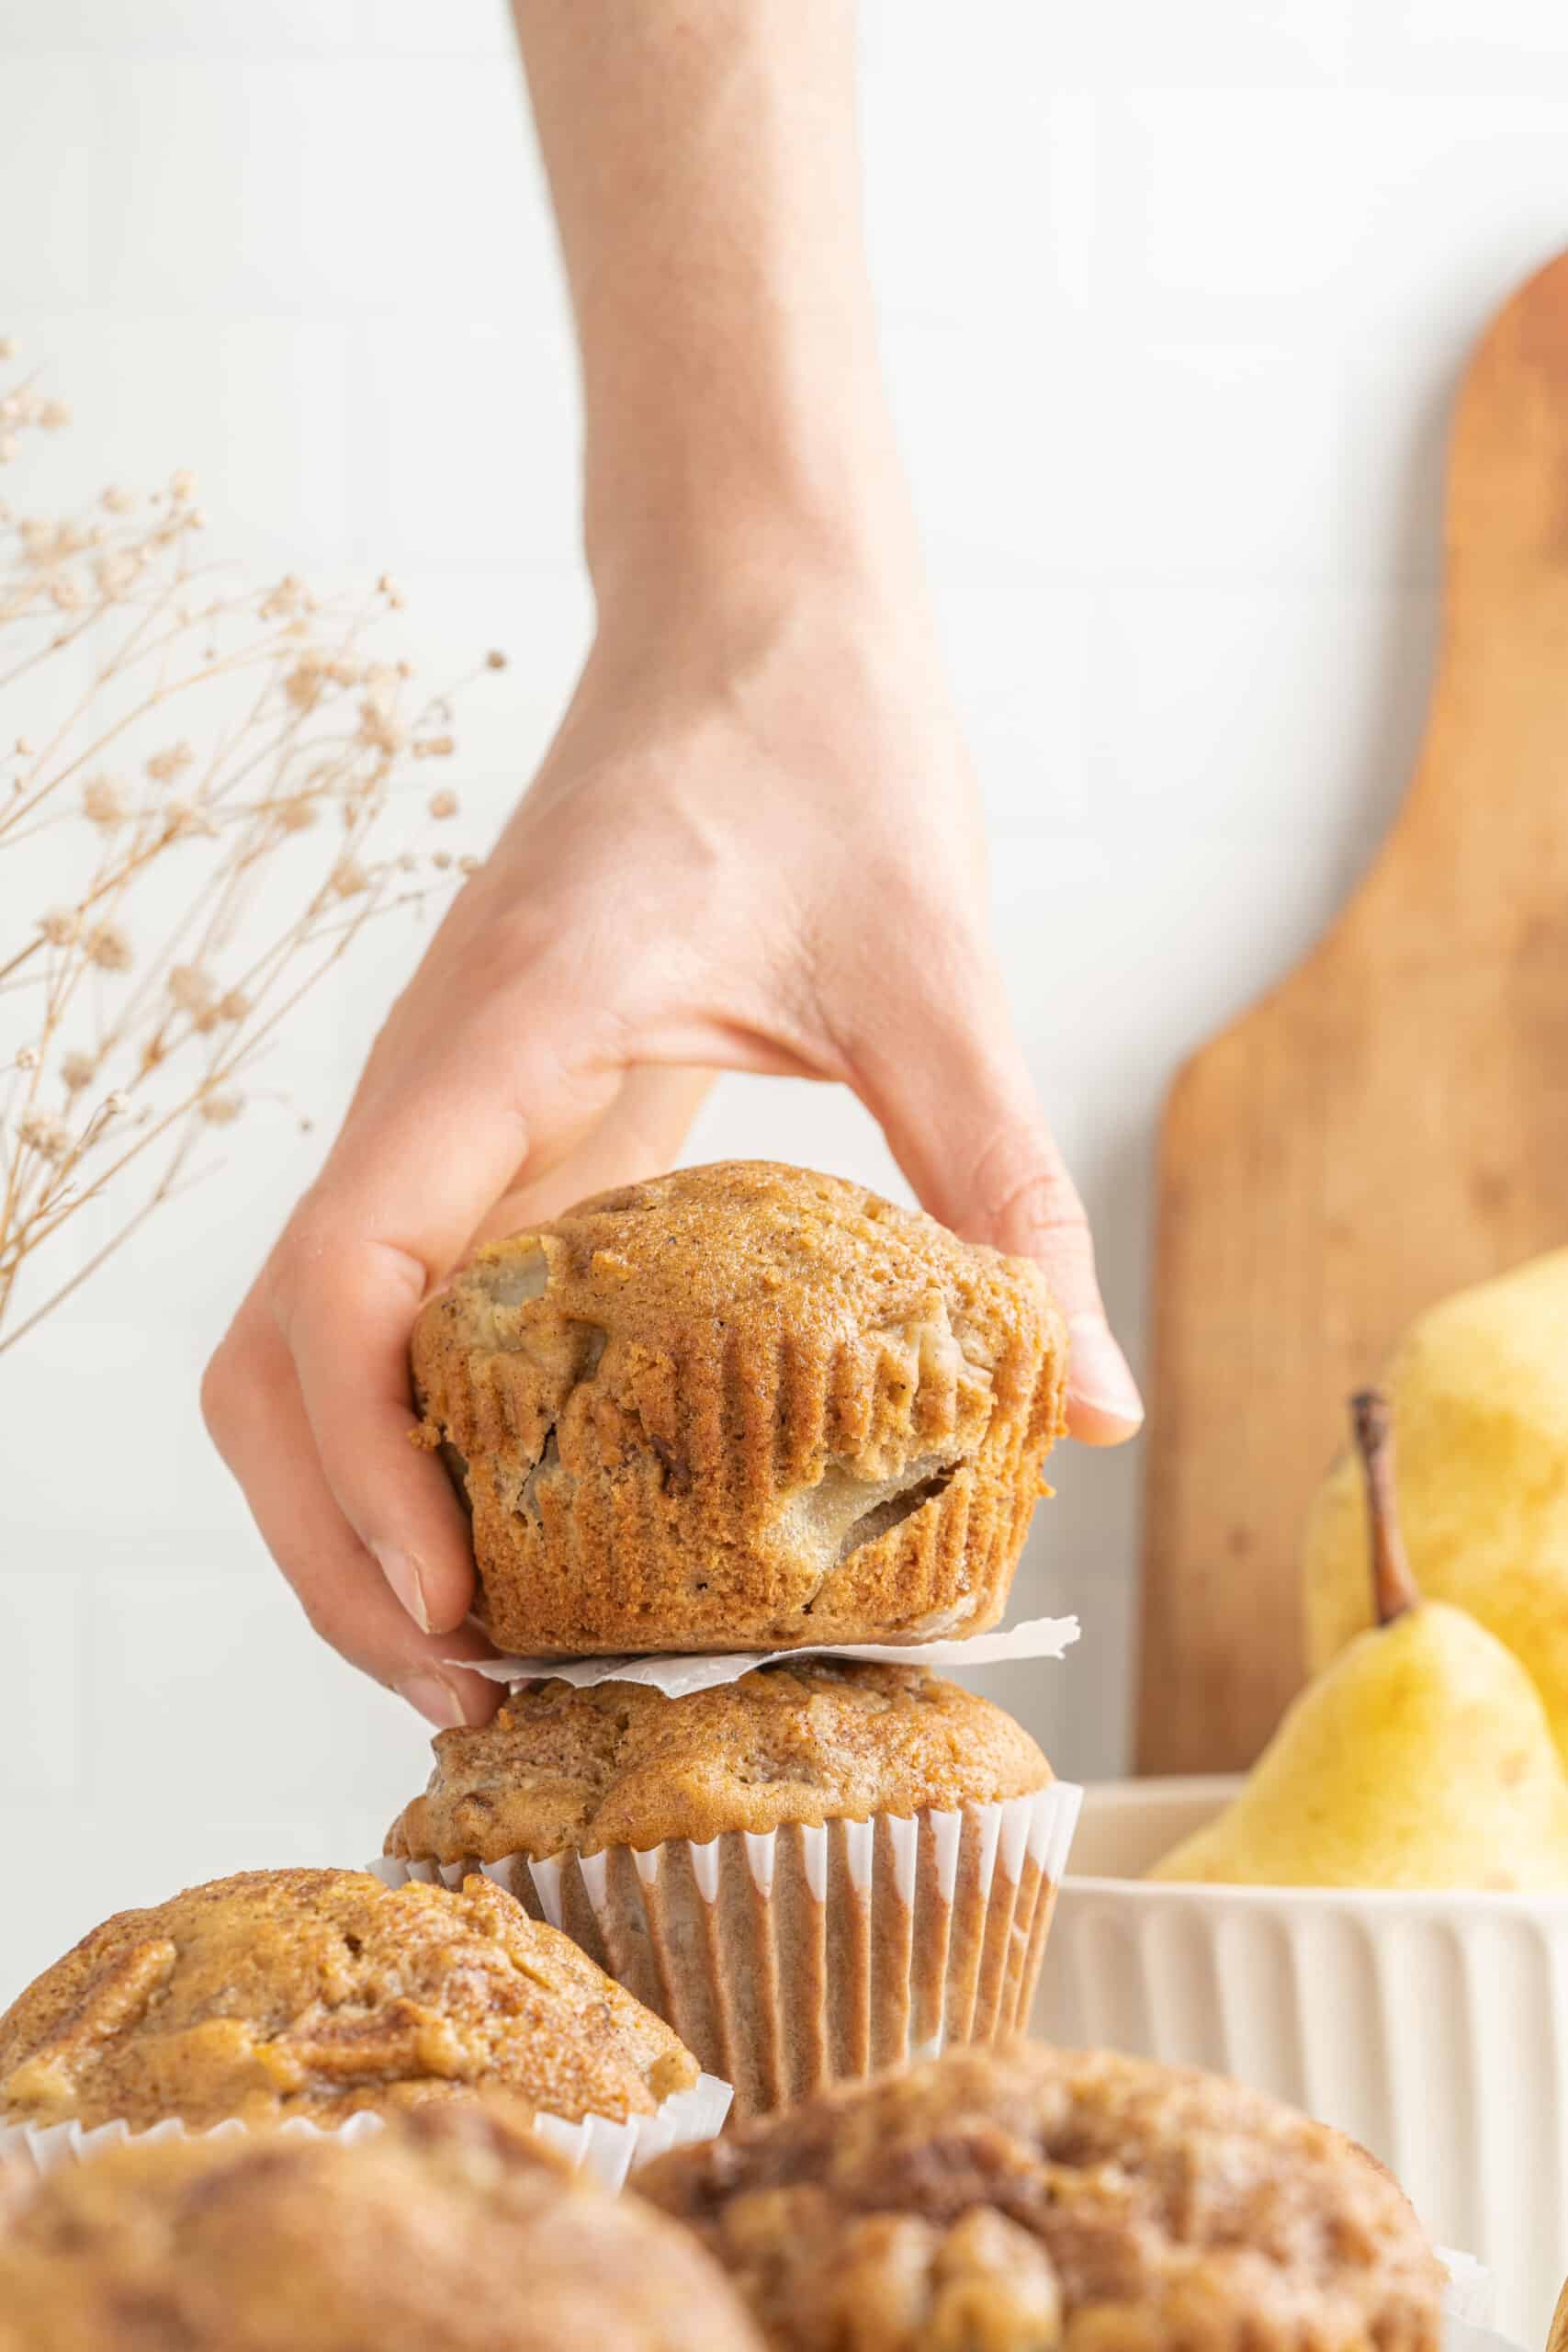 Holding Pear Muffins 